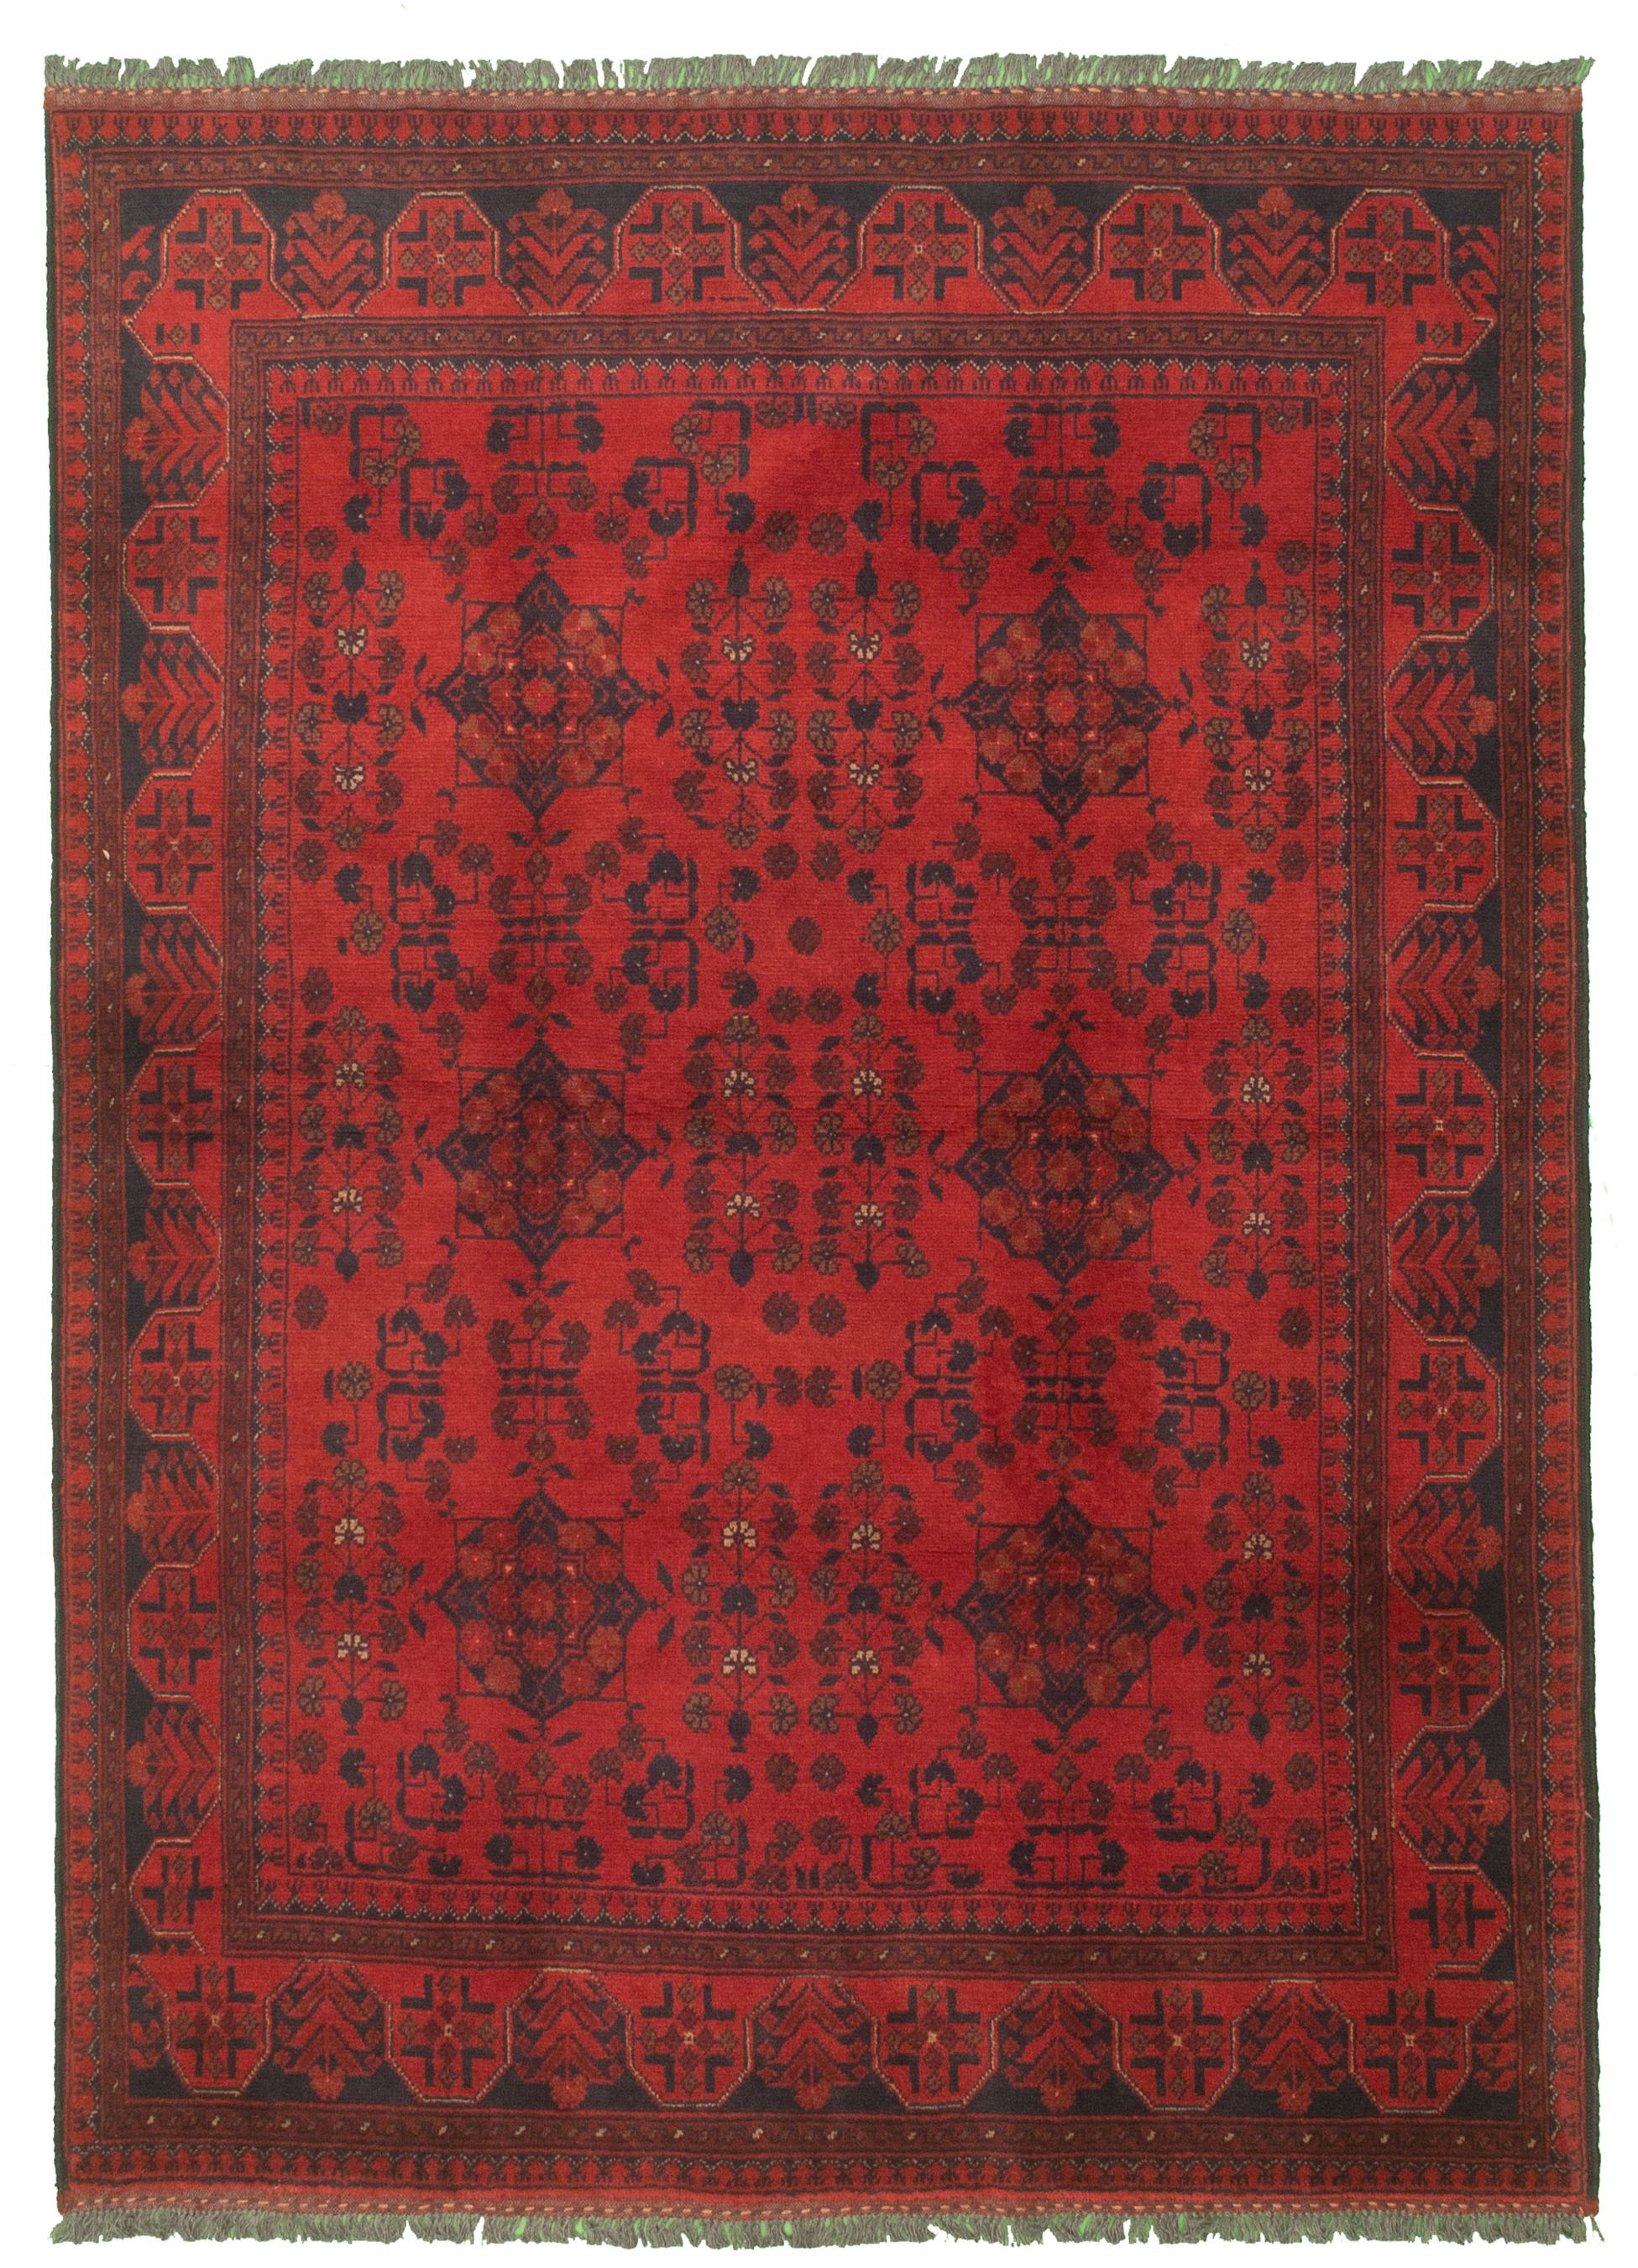 Hand-knotted Finest Khal Mohammadi Red Wool Rug 4'11" x 6'7"  Size: 4'11" x 6'7"  